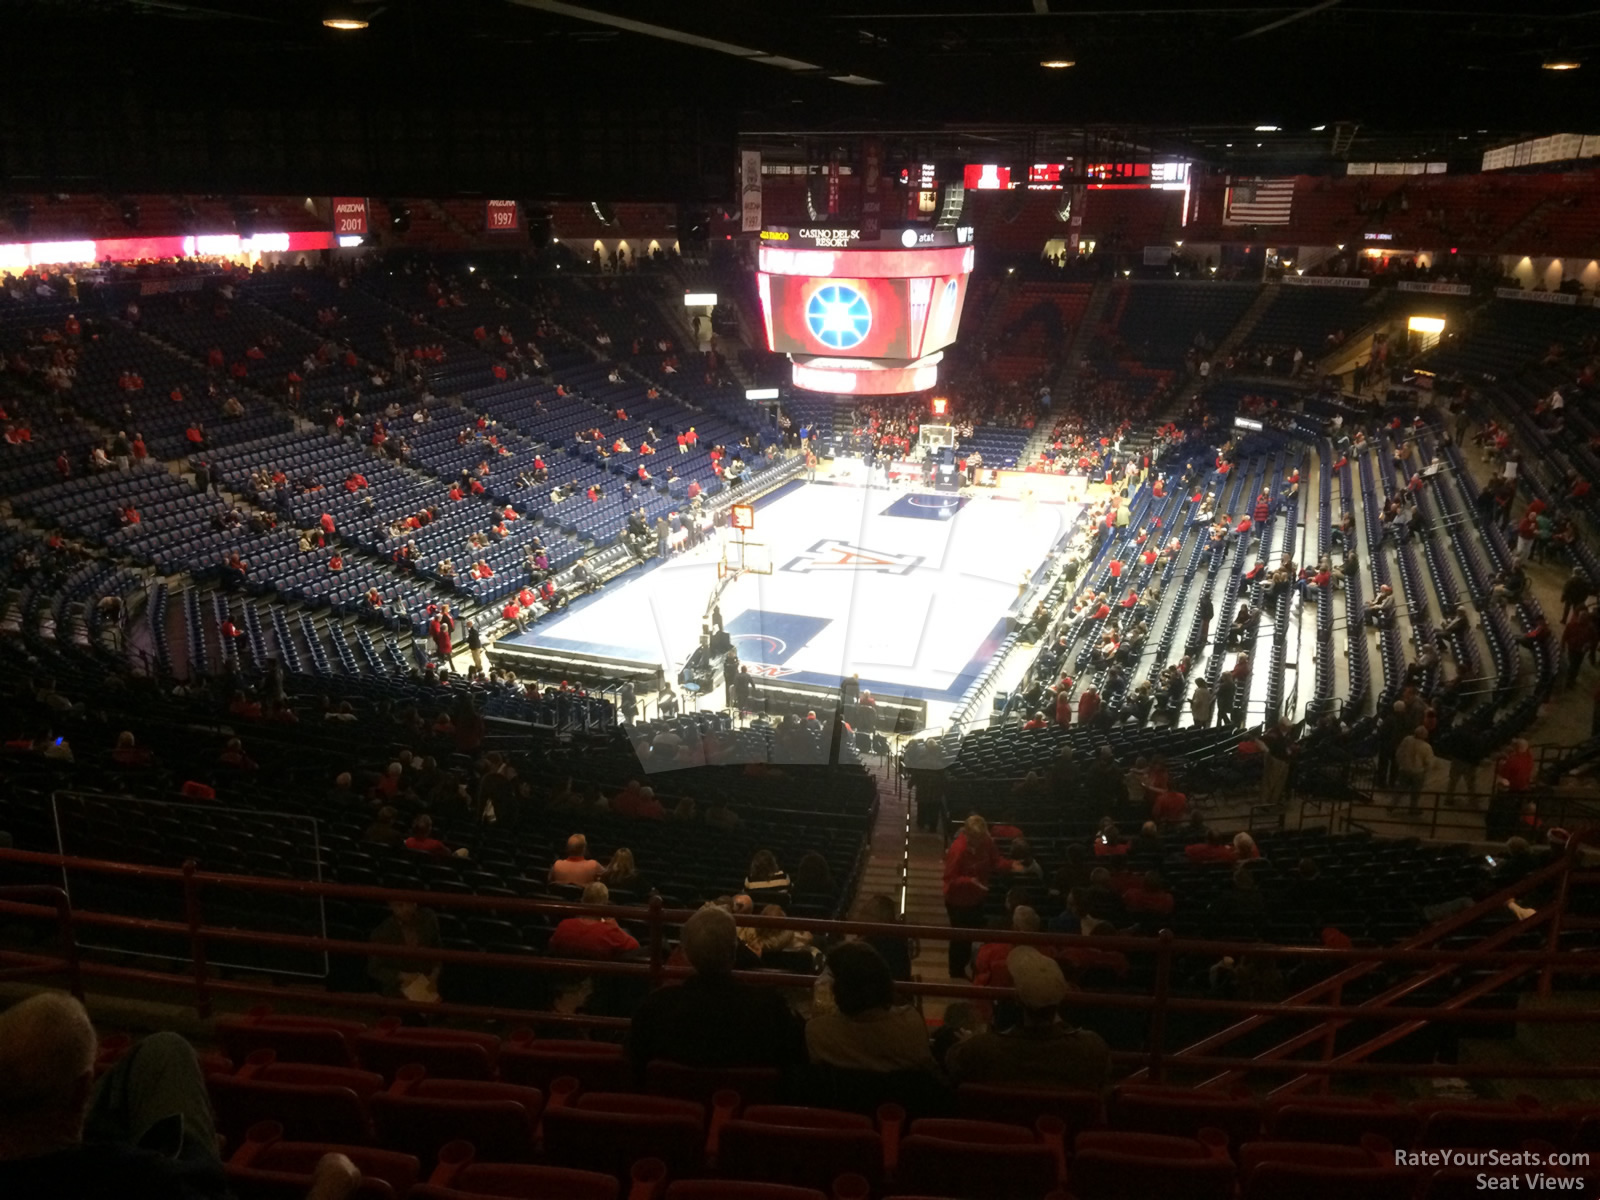 section 106, row 41 seat view  - mckale center